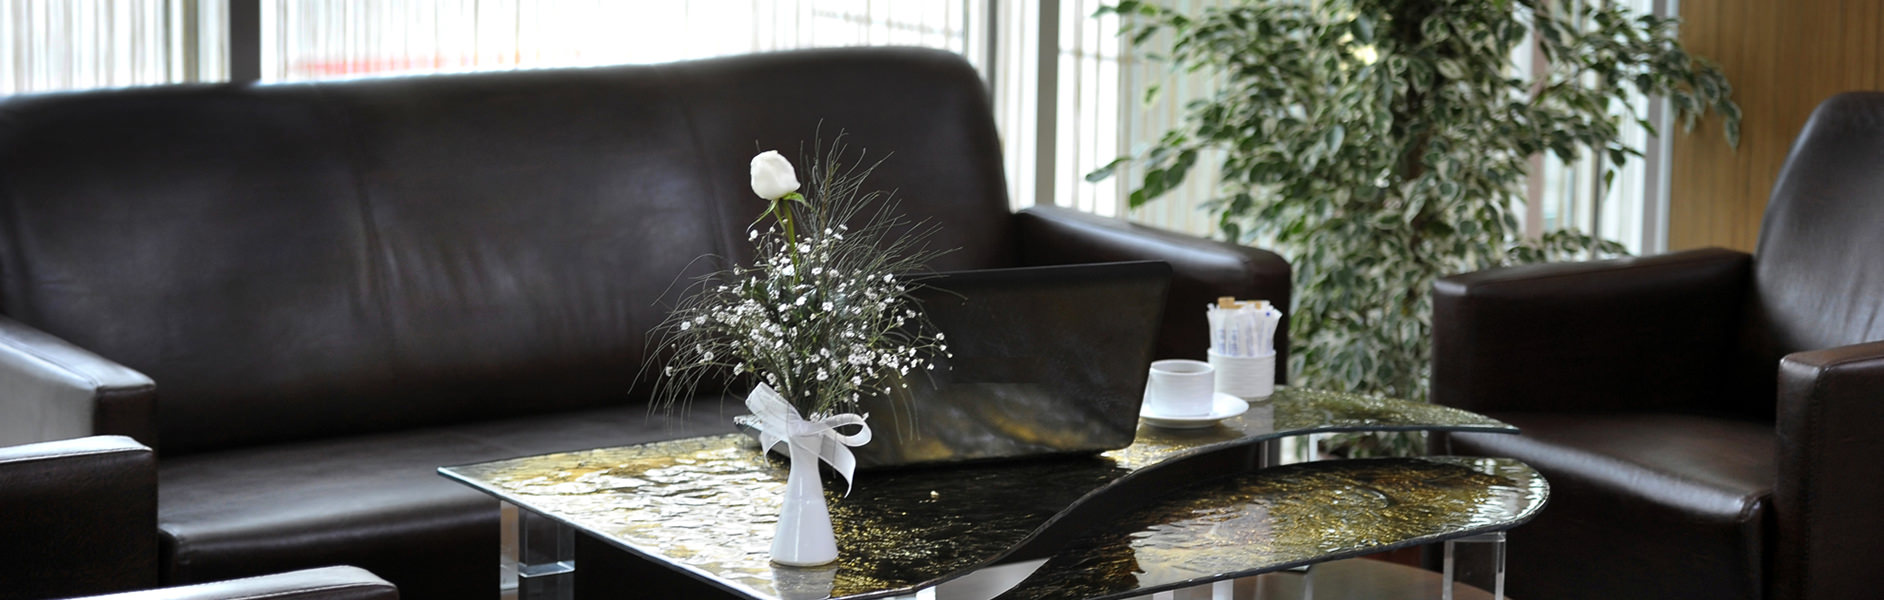 RHISS HOTEL BOSTANCI- Istanbul Anatolian Side Business Hotel - Comfort and Quality together..